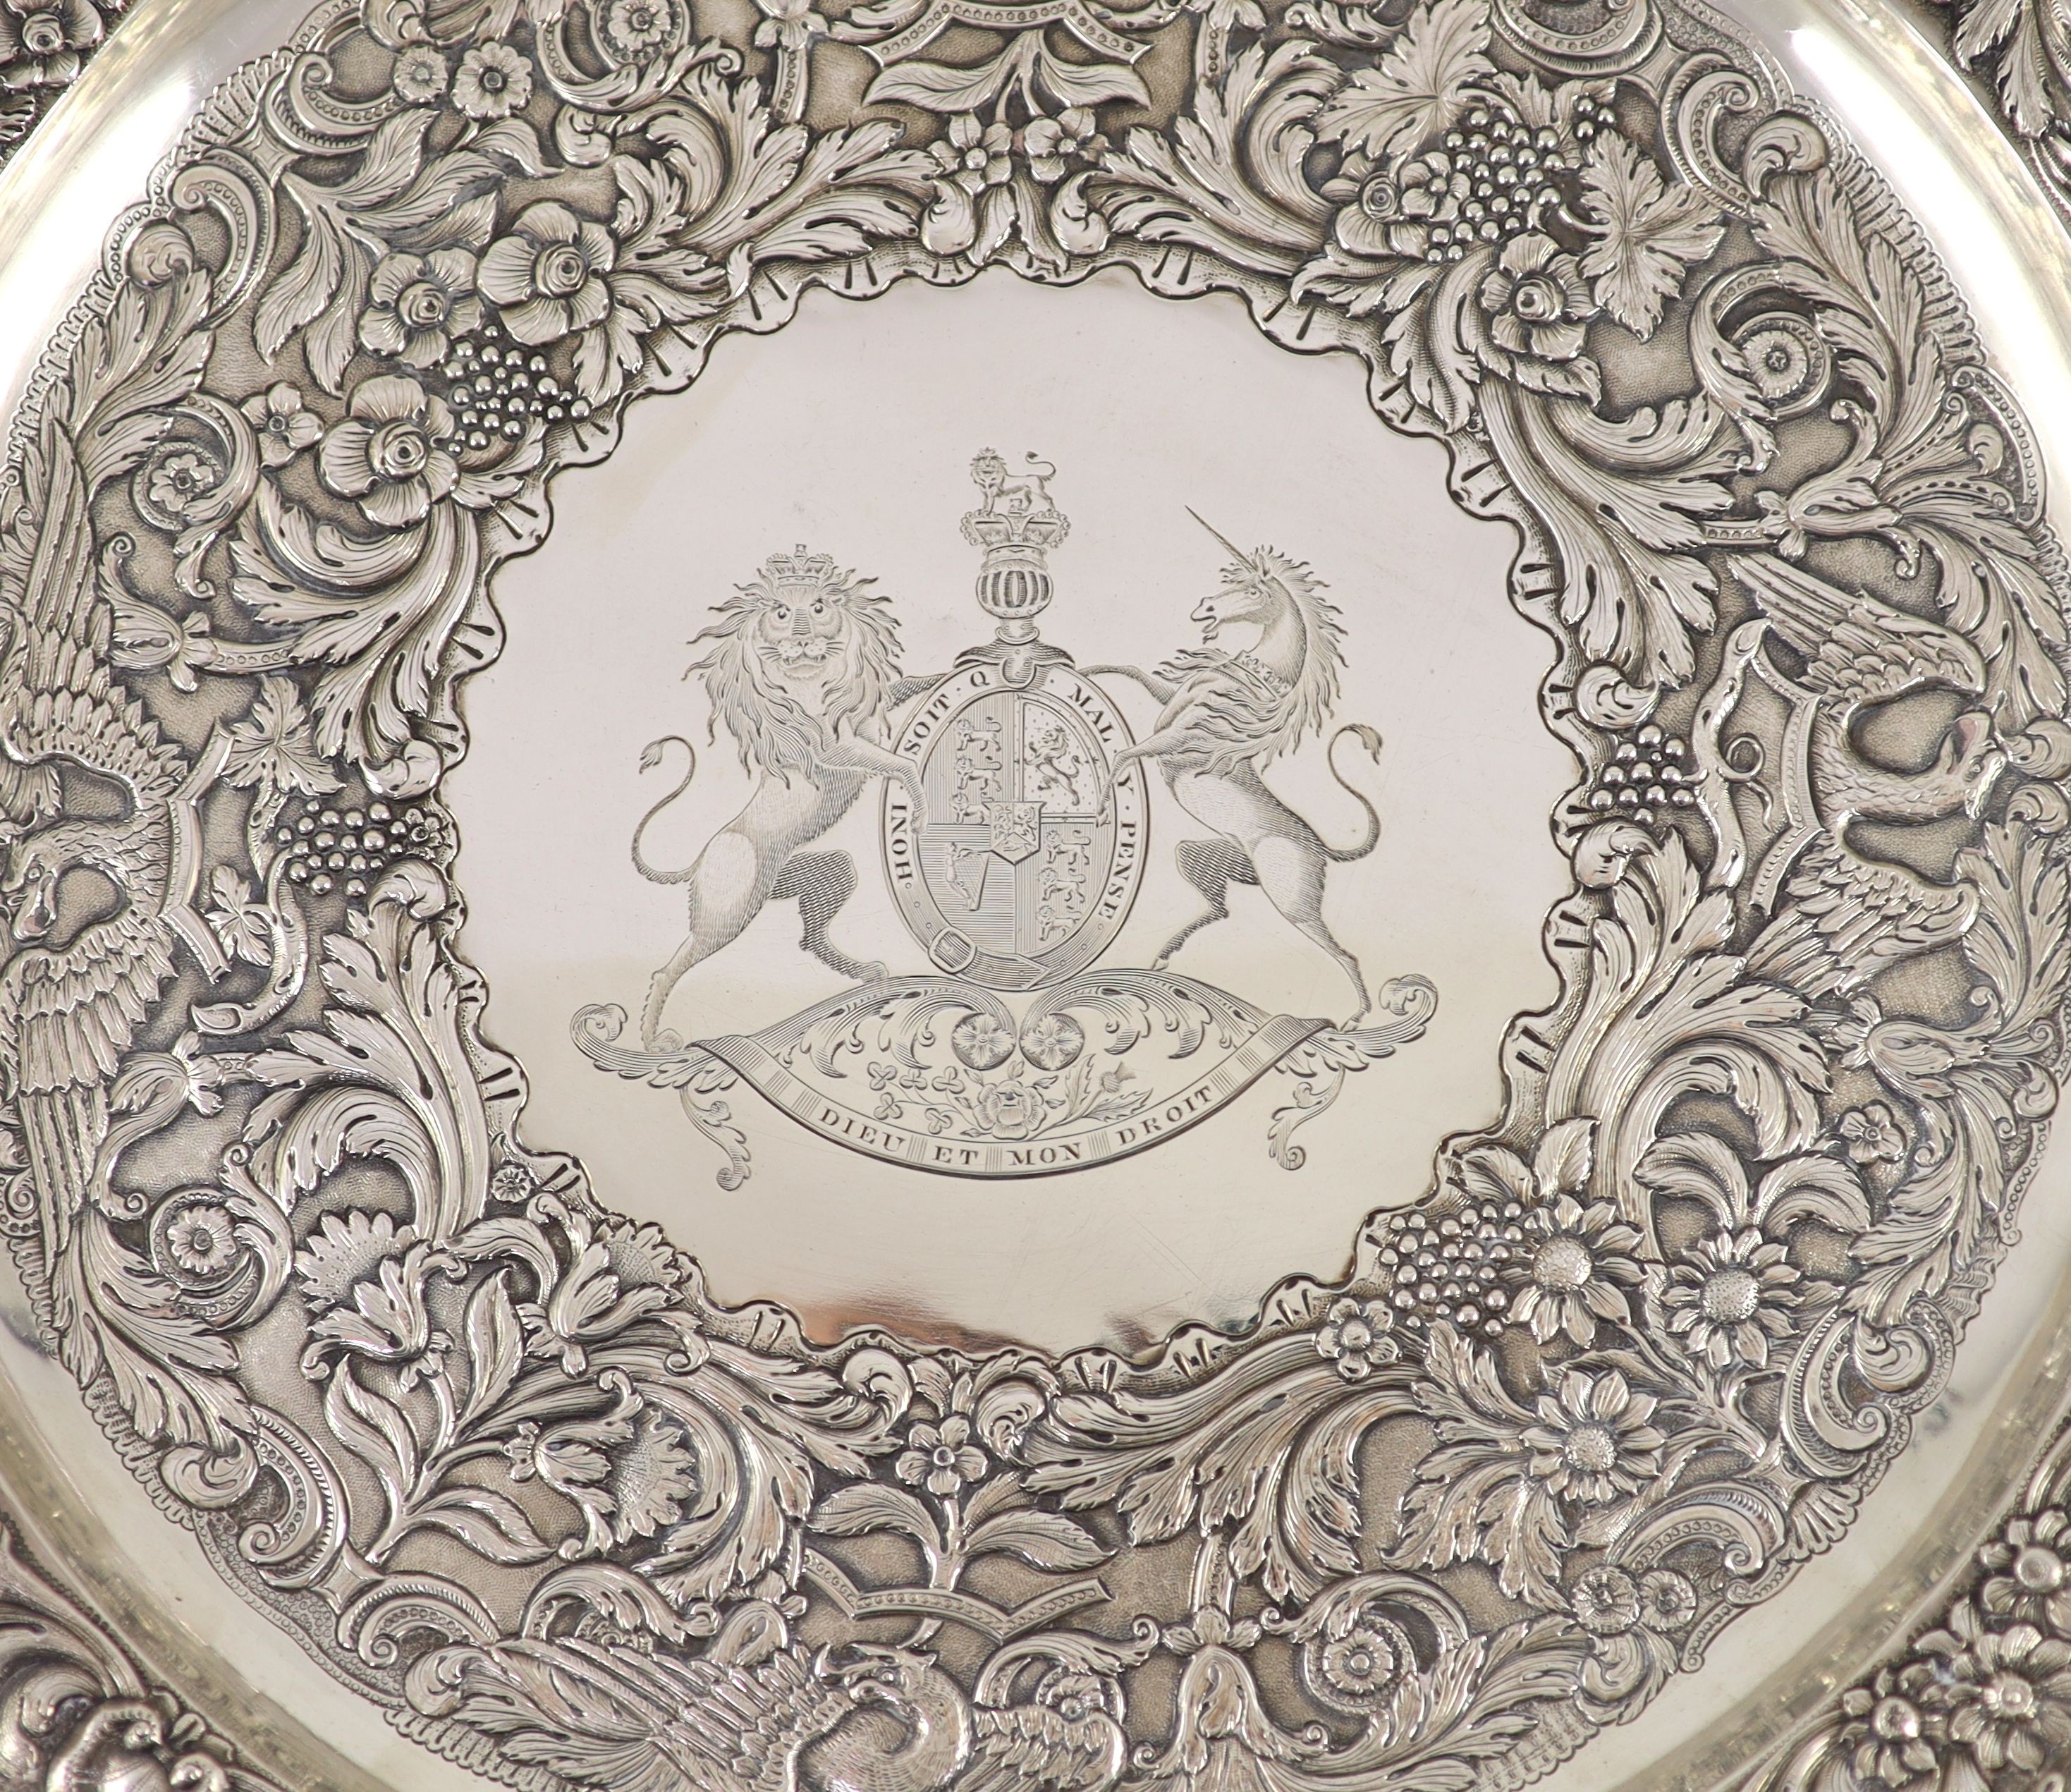 A George IV Irish embossed silver charger, by Stephen Bergin, engraved with the United Kingdom Royal Coat of Arms